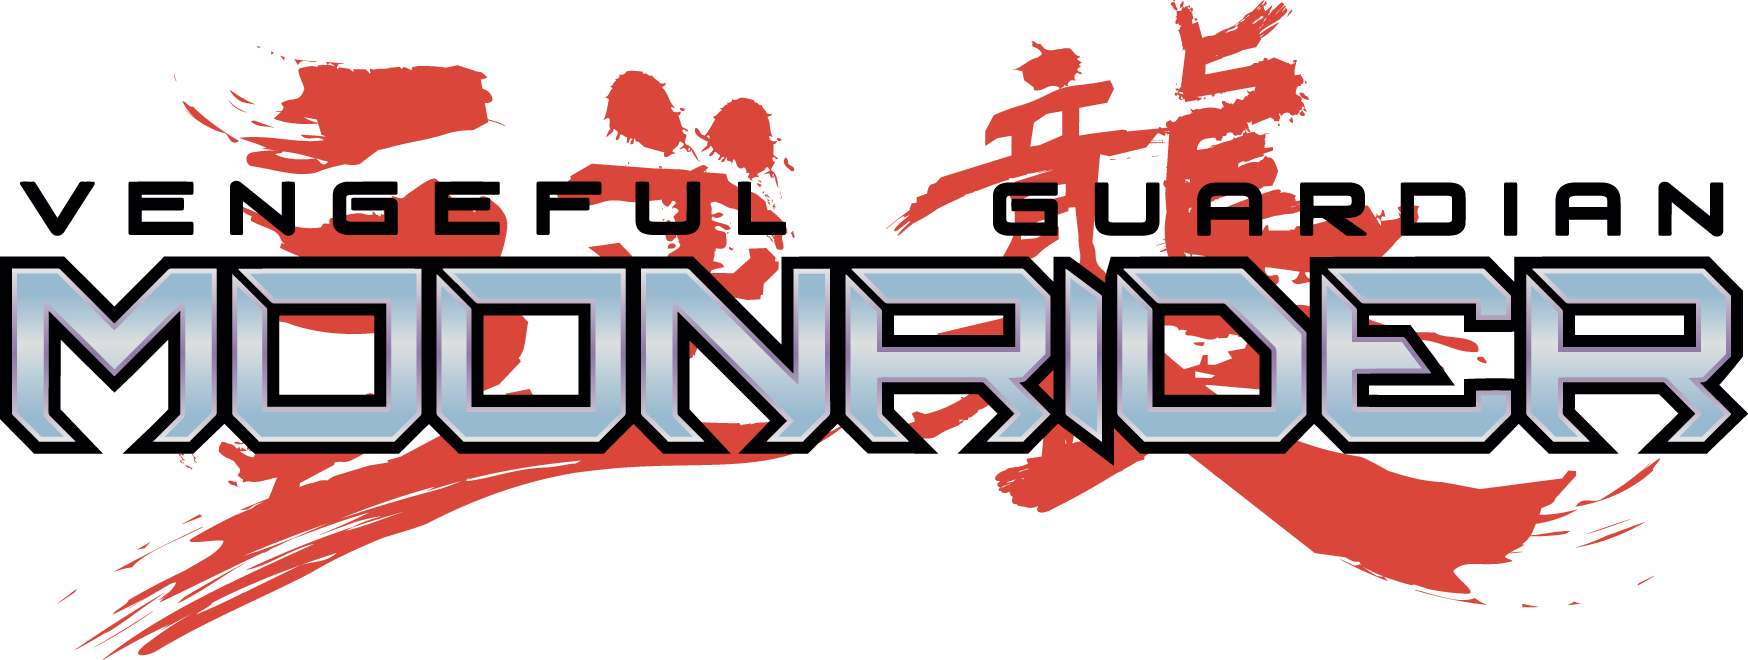 Vengeful Guardian: Moonrider is now available for the Nintendo Switch! Vengeful  Guardian: Moonrider is a side-scrolling action platformer…